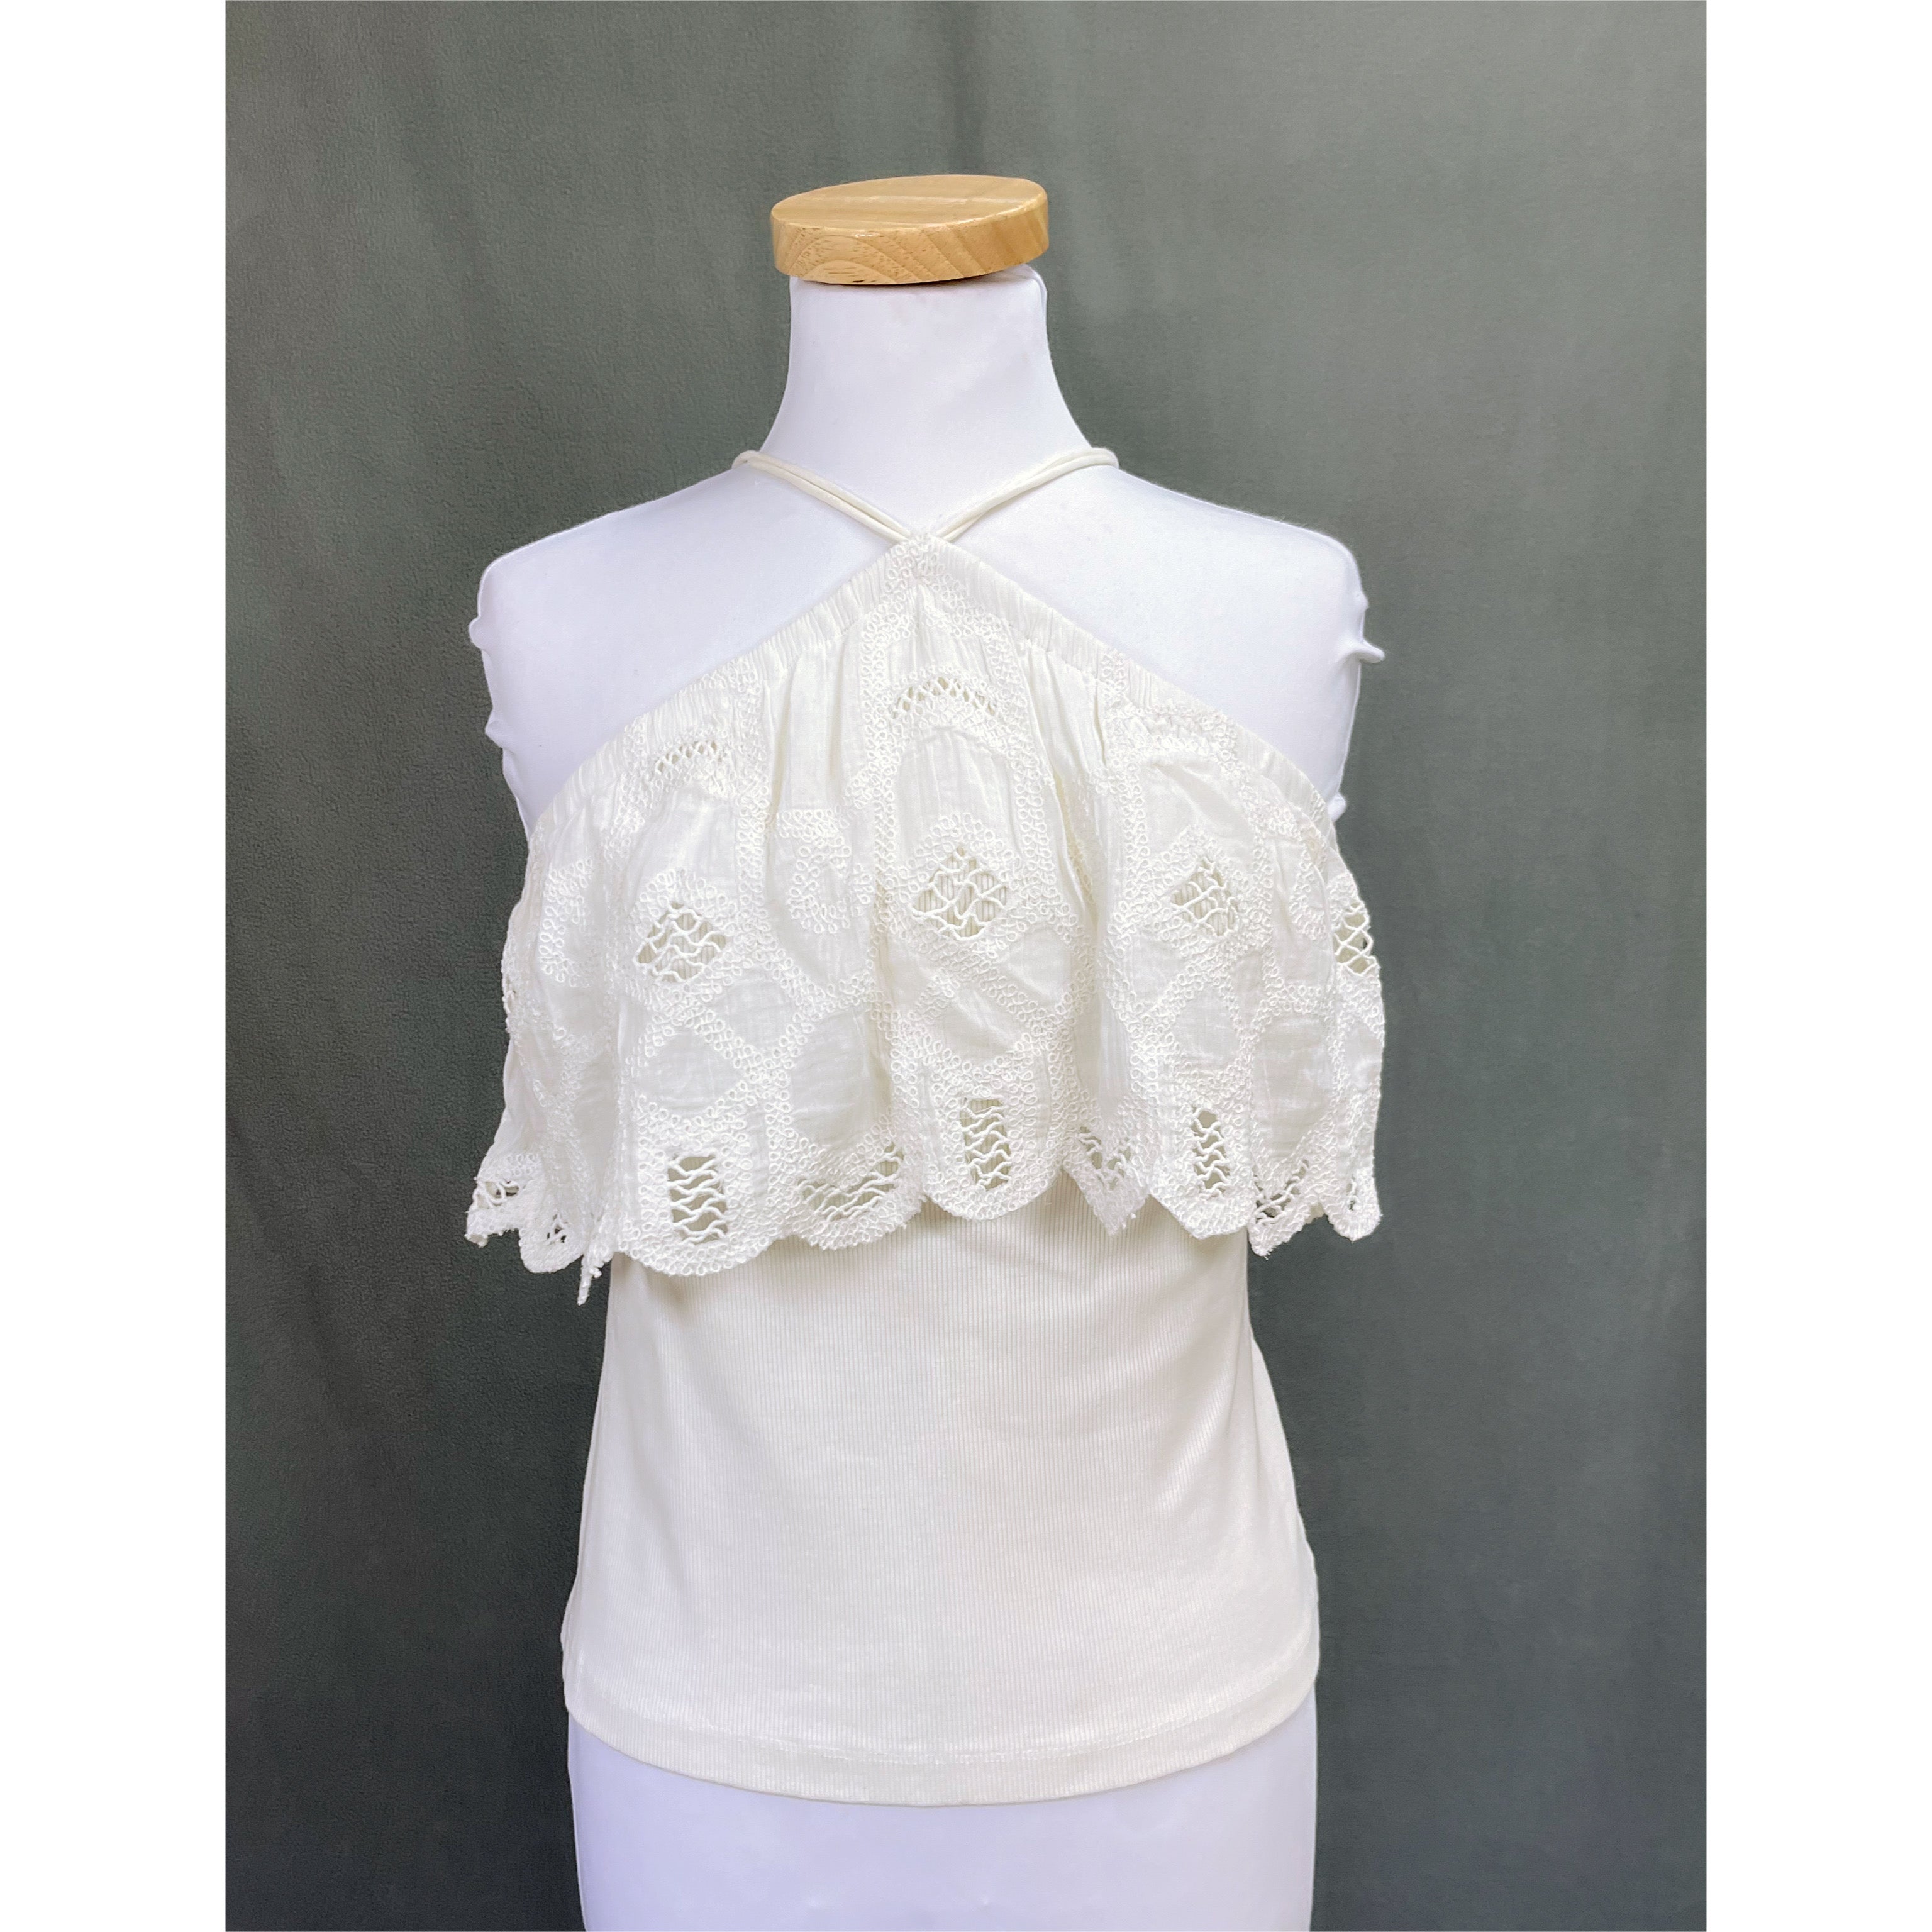 Anthropologie ivory top, size M